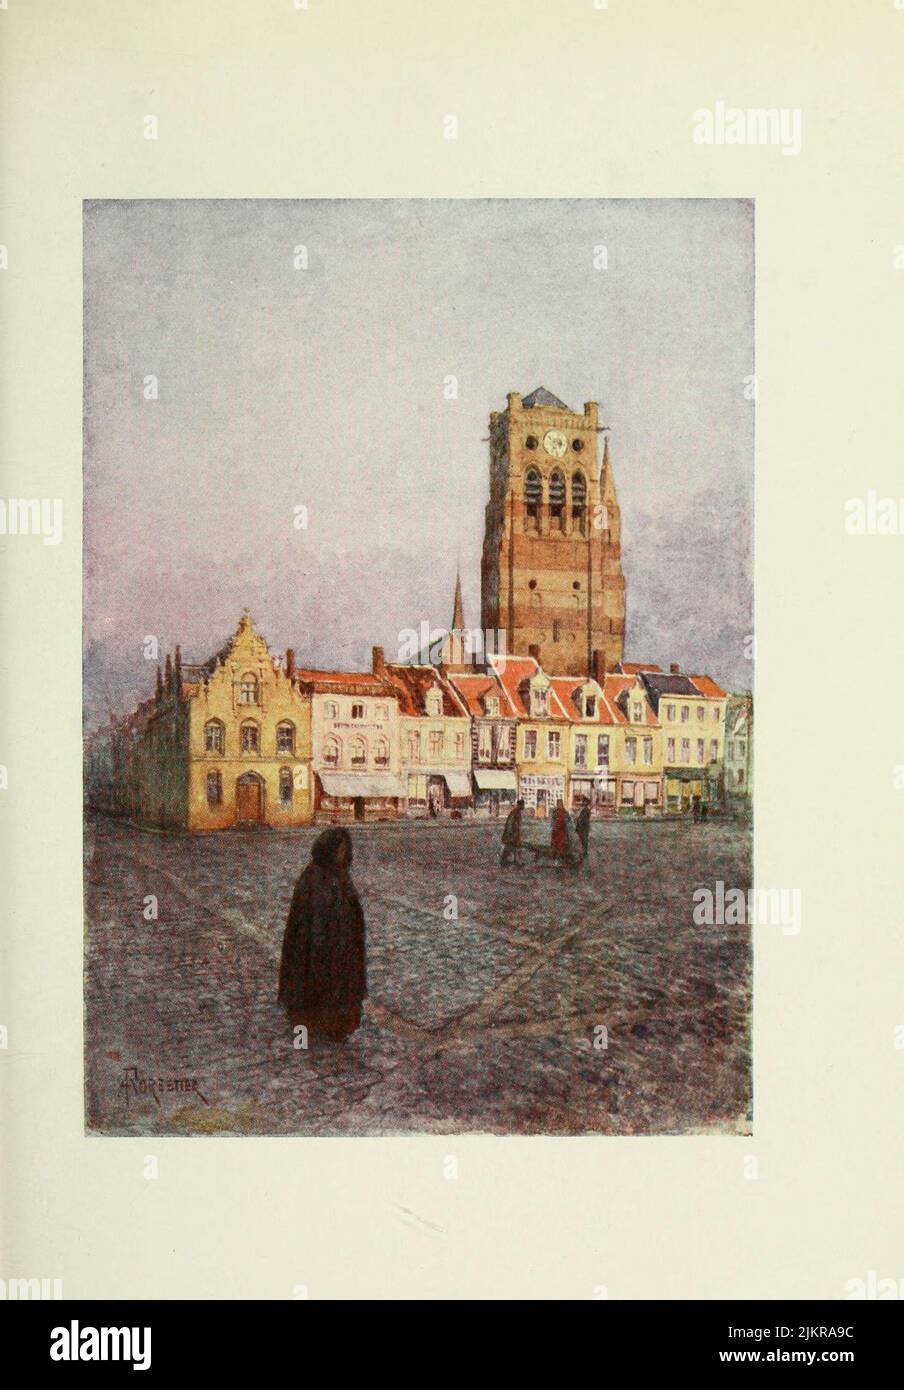 Furnes Tower of St. Nicholas Painted by Amedee Forestier, from the book '  Bruges and West Flanders ' by George William Thomson Omond, Publication date 1906 Publisher London : A. & C. Black Sir Amédée Forestier (Paris 1854 – 18 November 1930 London) was an Anglo-French artist and illustrator who specialised in historical and prehistoric scenes, and landscapes. Stock Photo